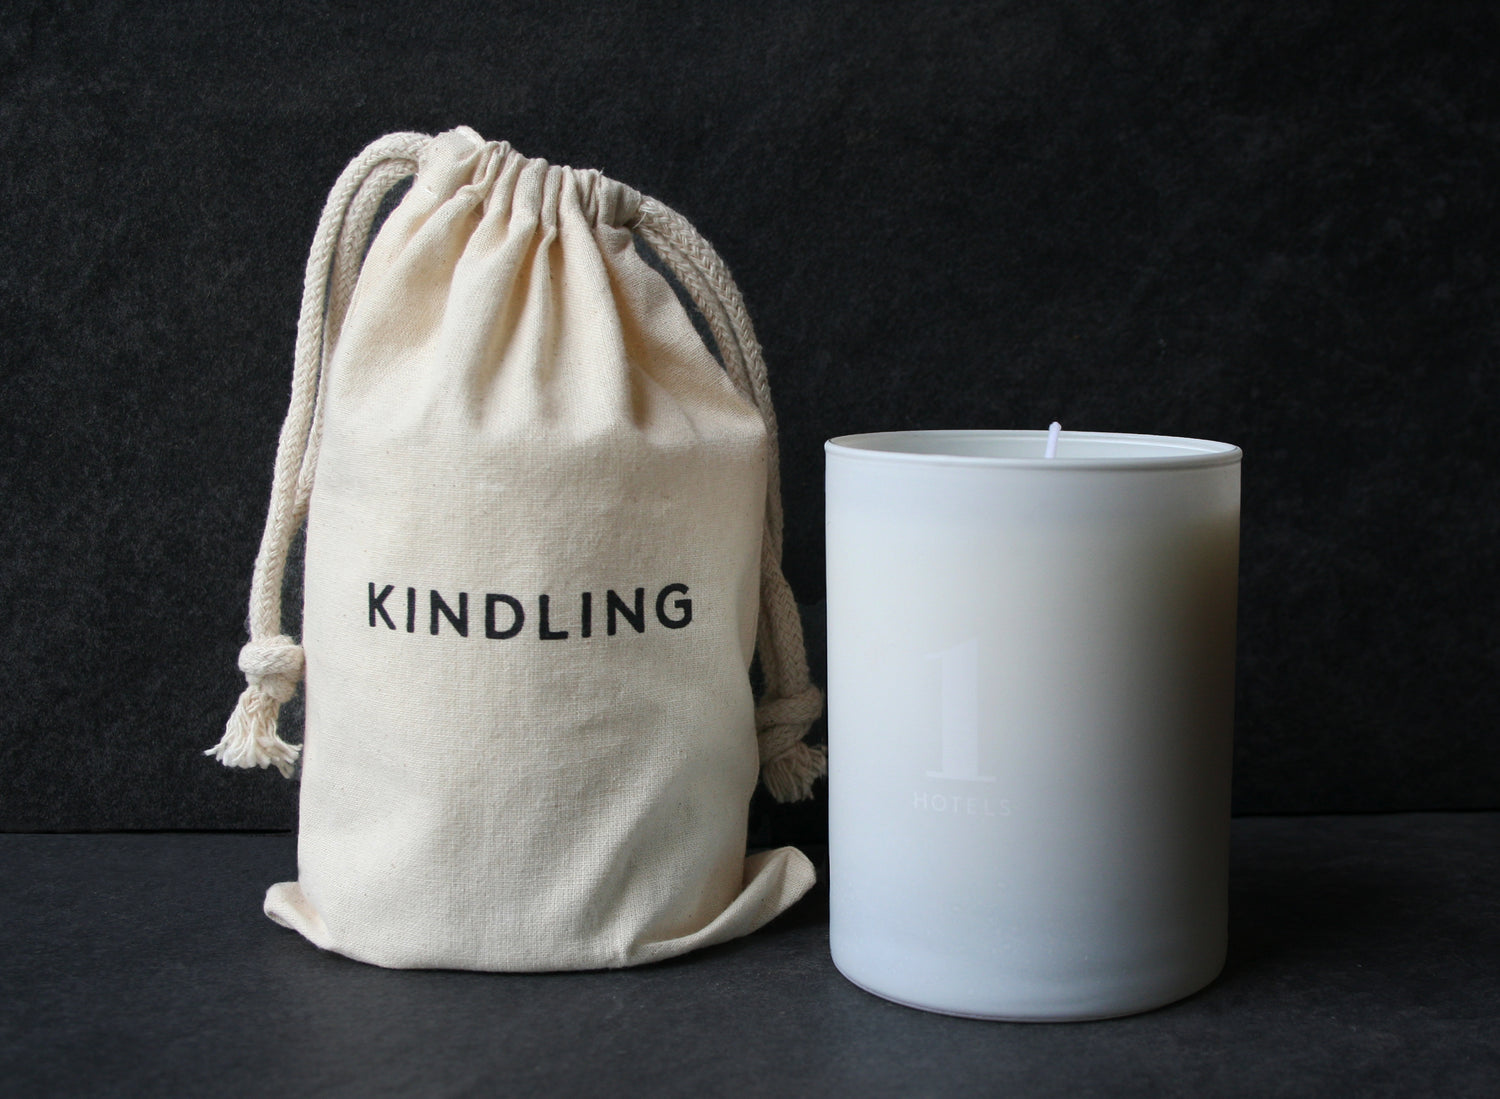 1Hotels medium candle and bag developed for 1Hotels in collaboration with Scent Marketing Inc